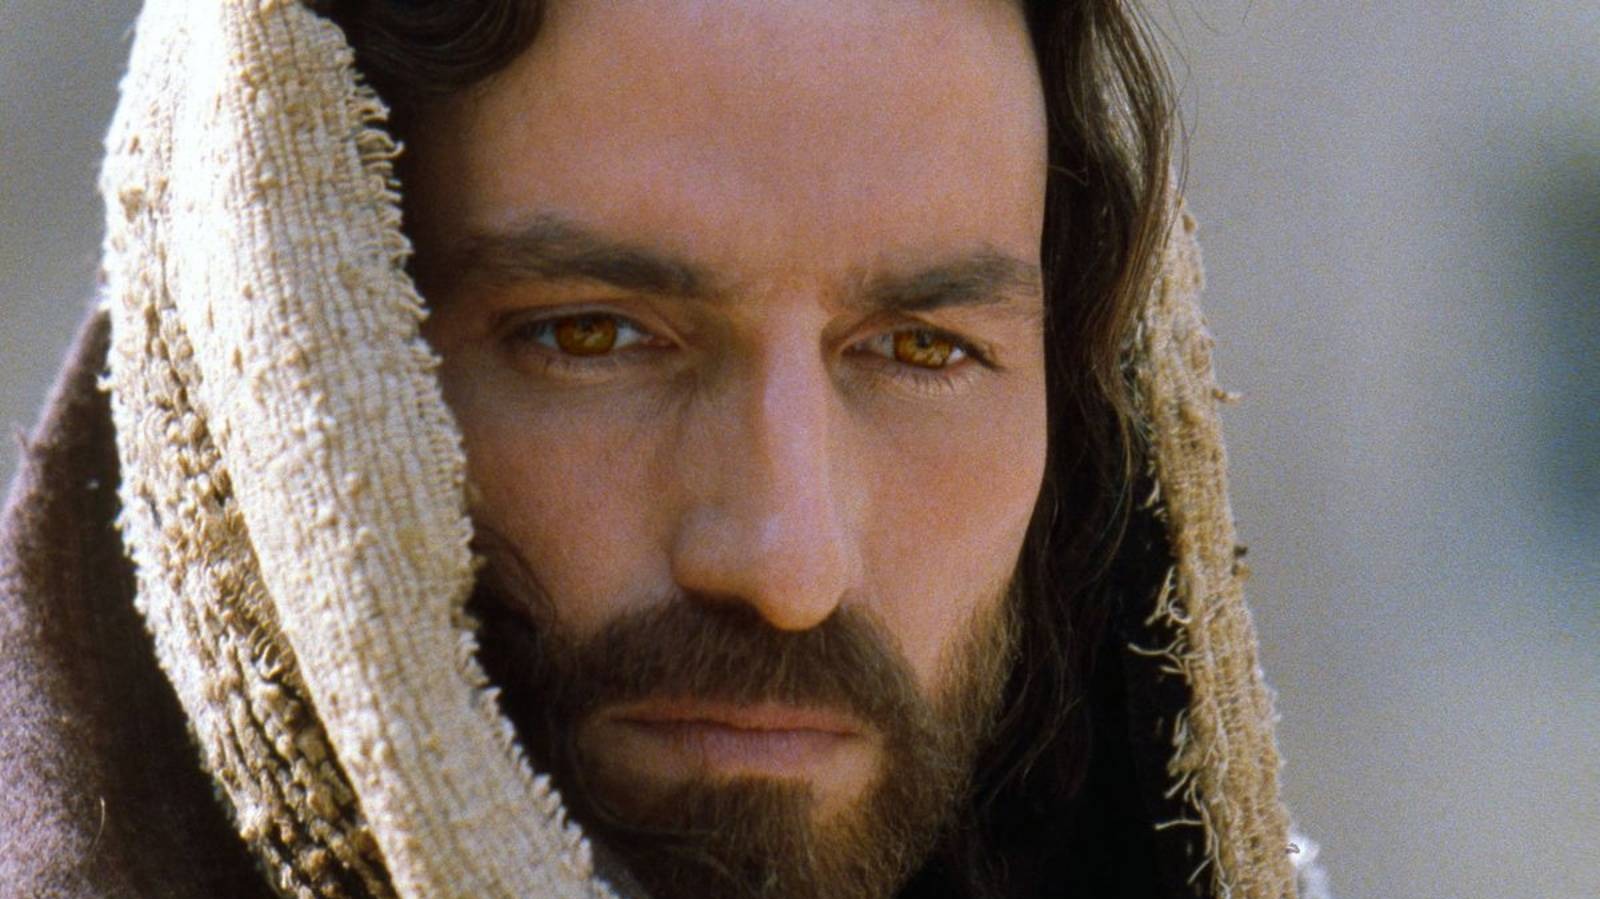 Resurrection of the Christ in the works, Movies